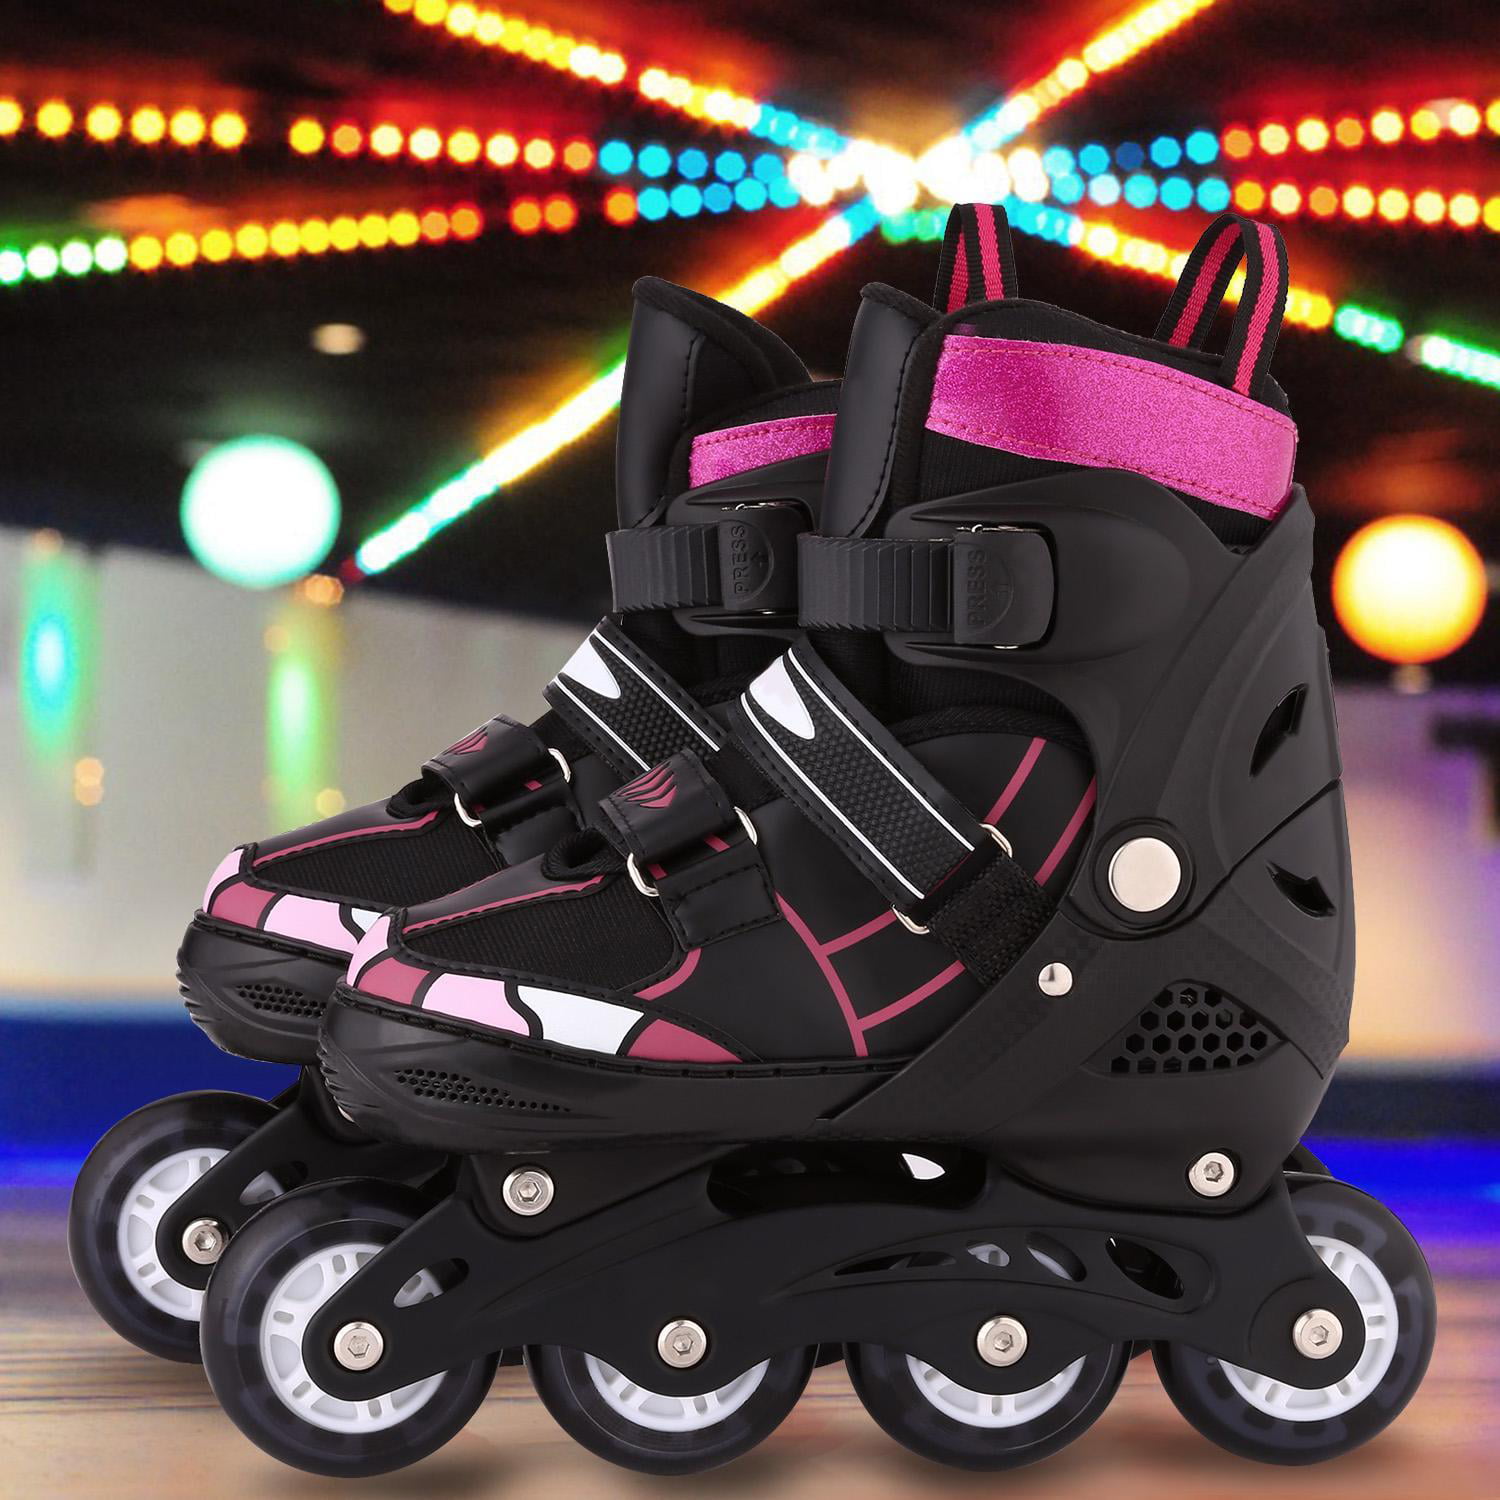 XINO Sports Adjustable Roller Skates for Children Featuring Illuminating LED 1 for sale online 